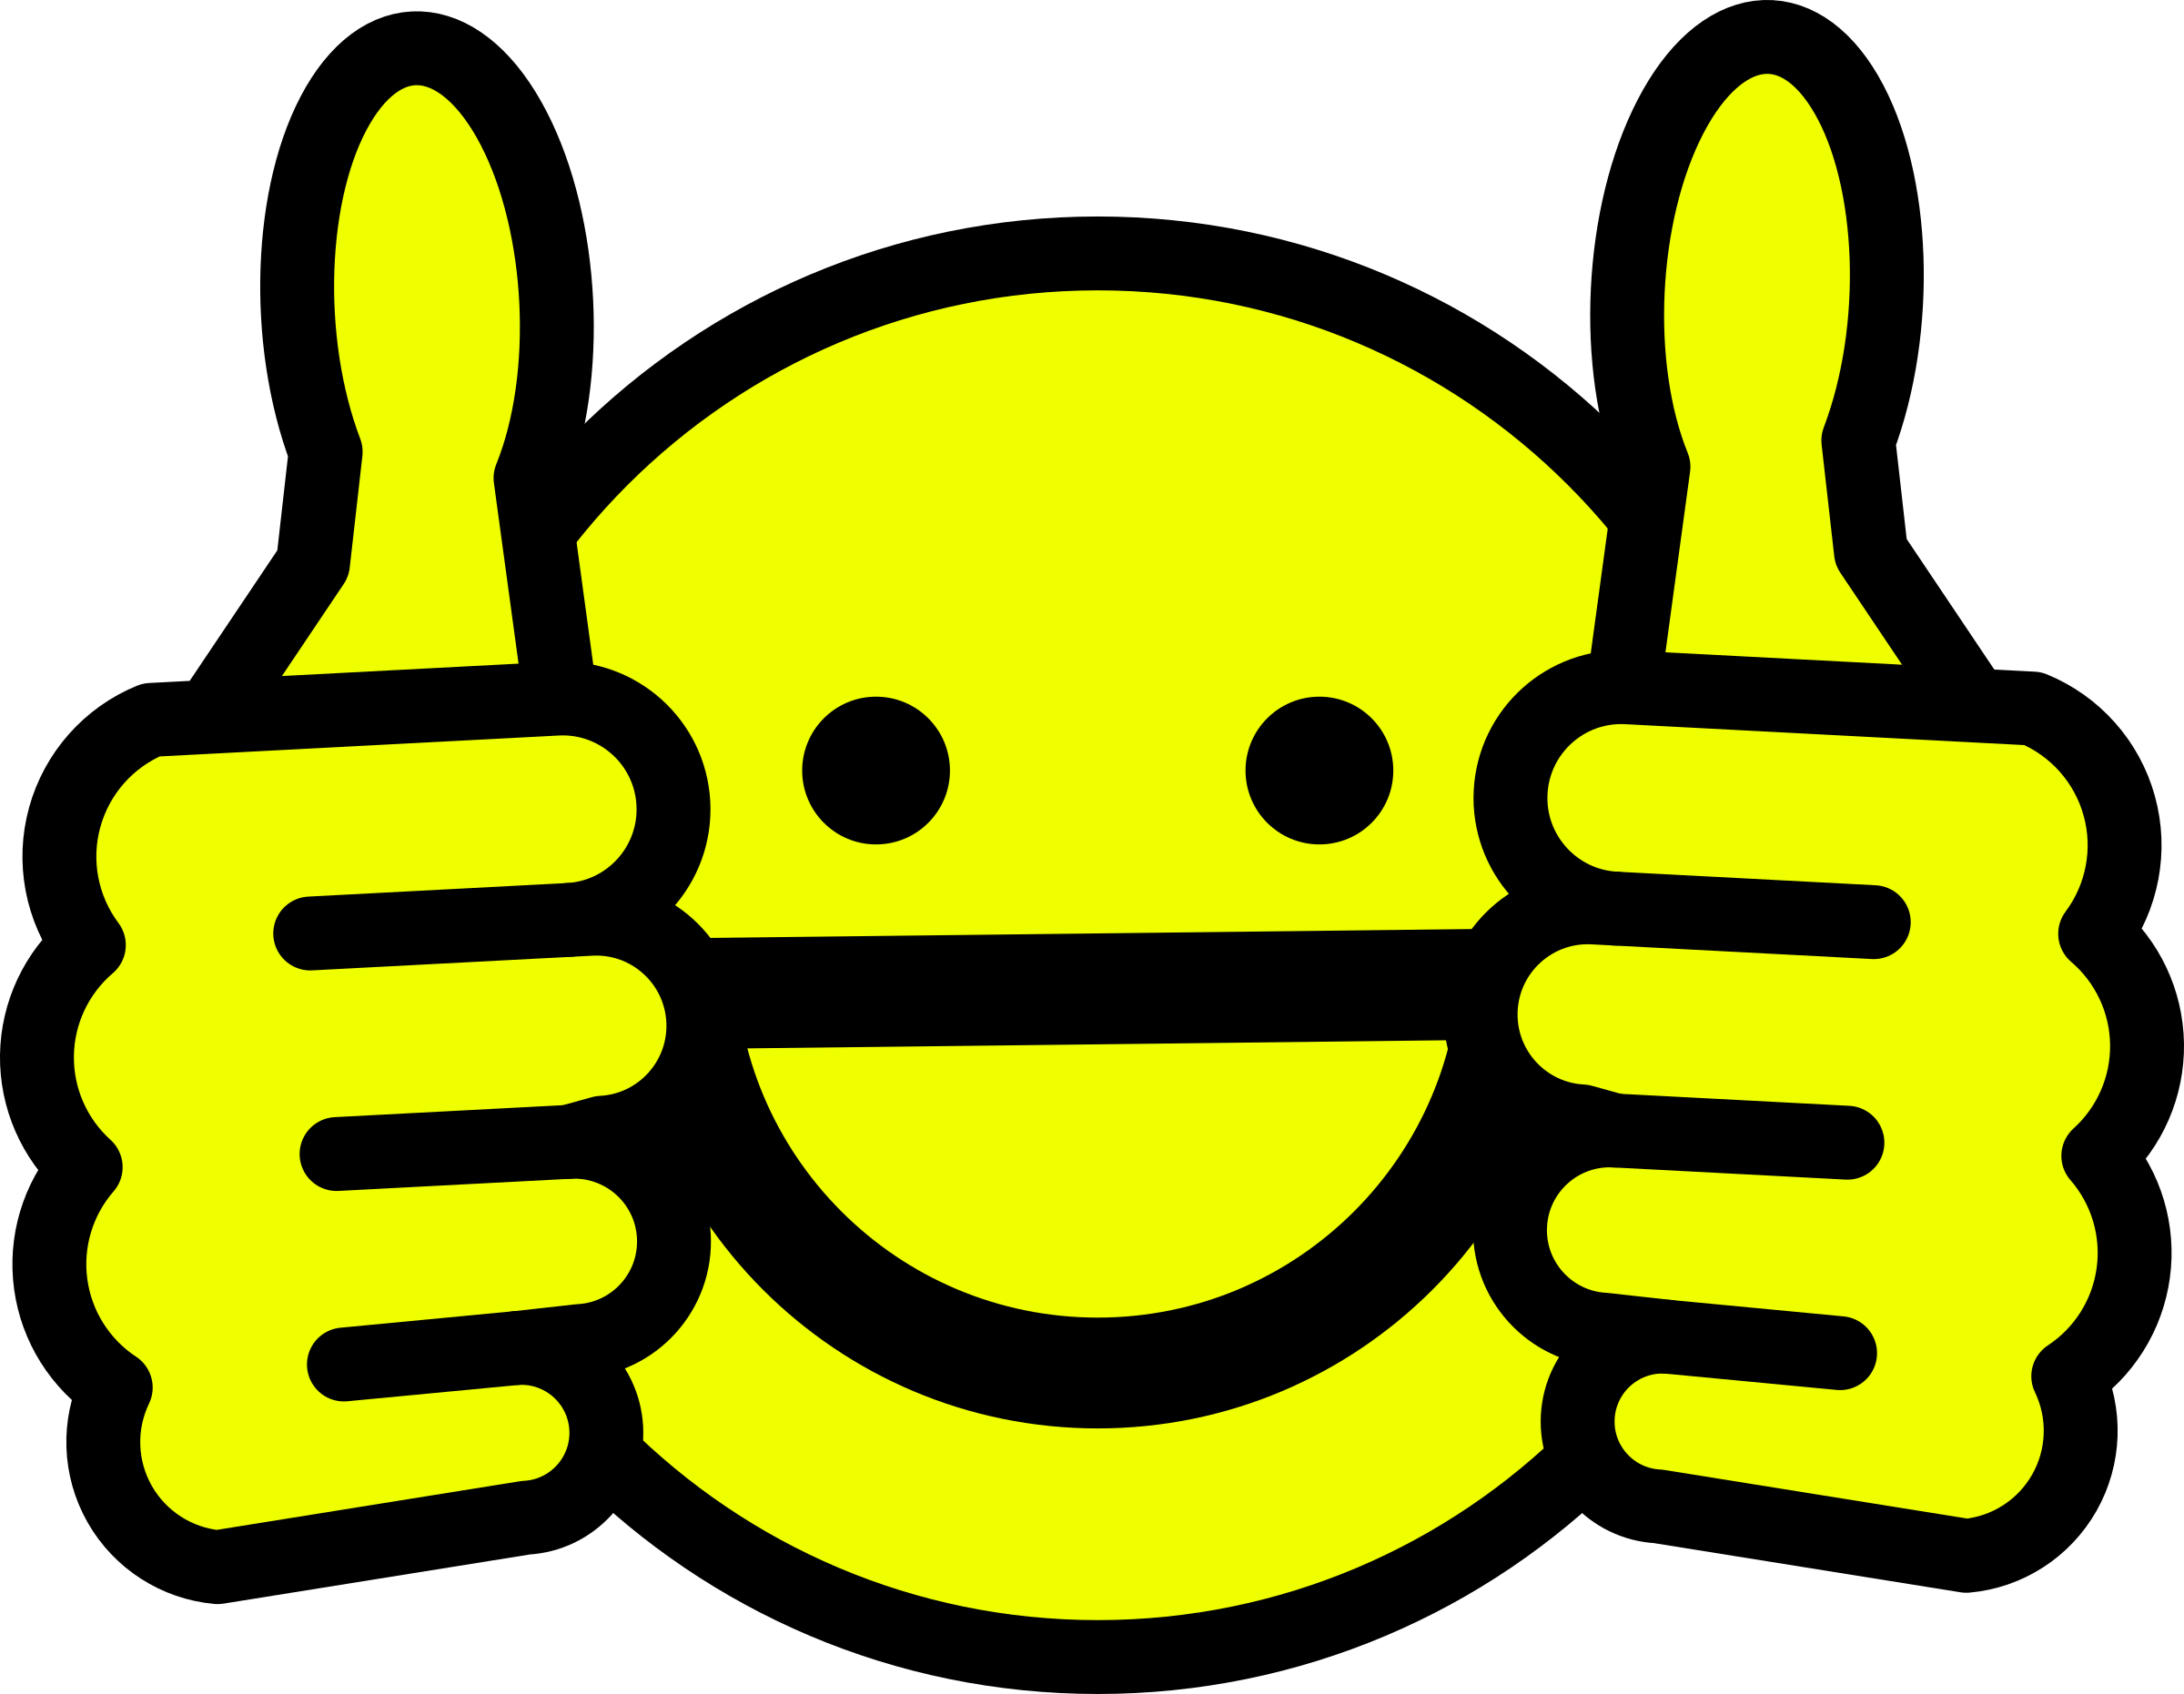 Awesome Face Awesome Smiley Funny Humor Icon Smiley Face ...
